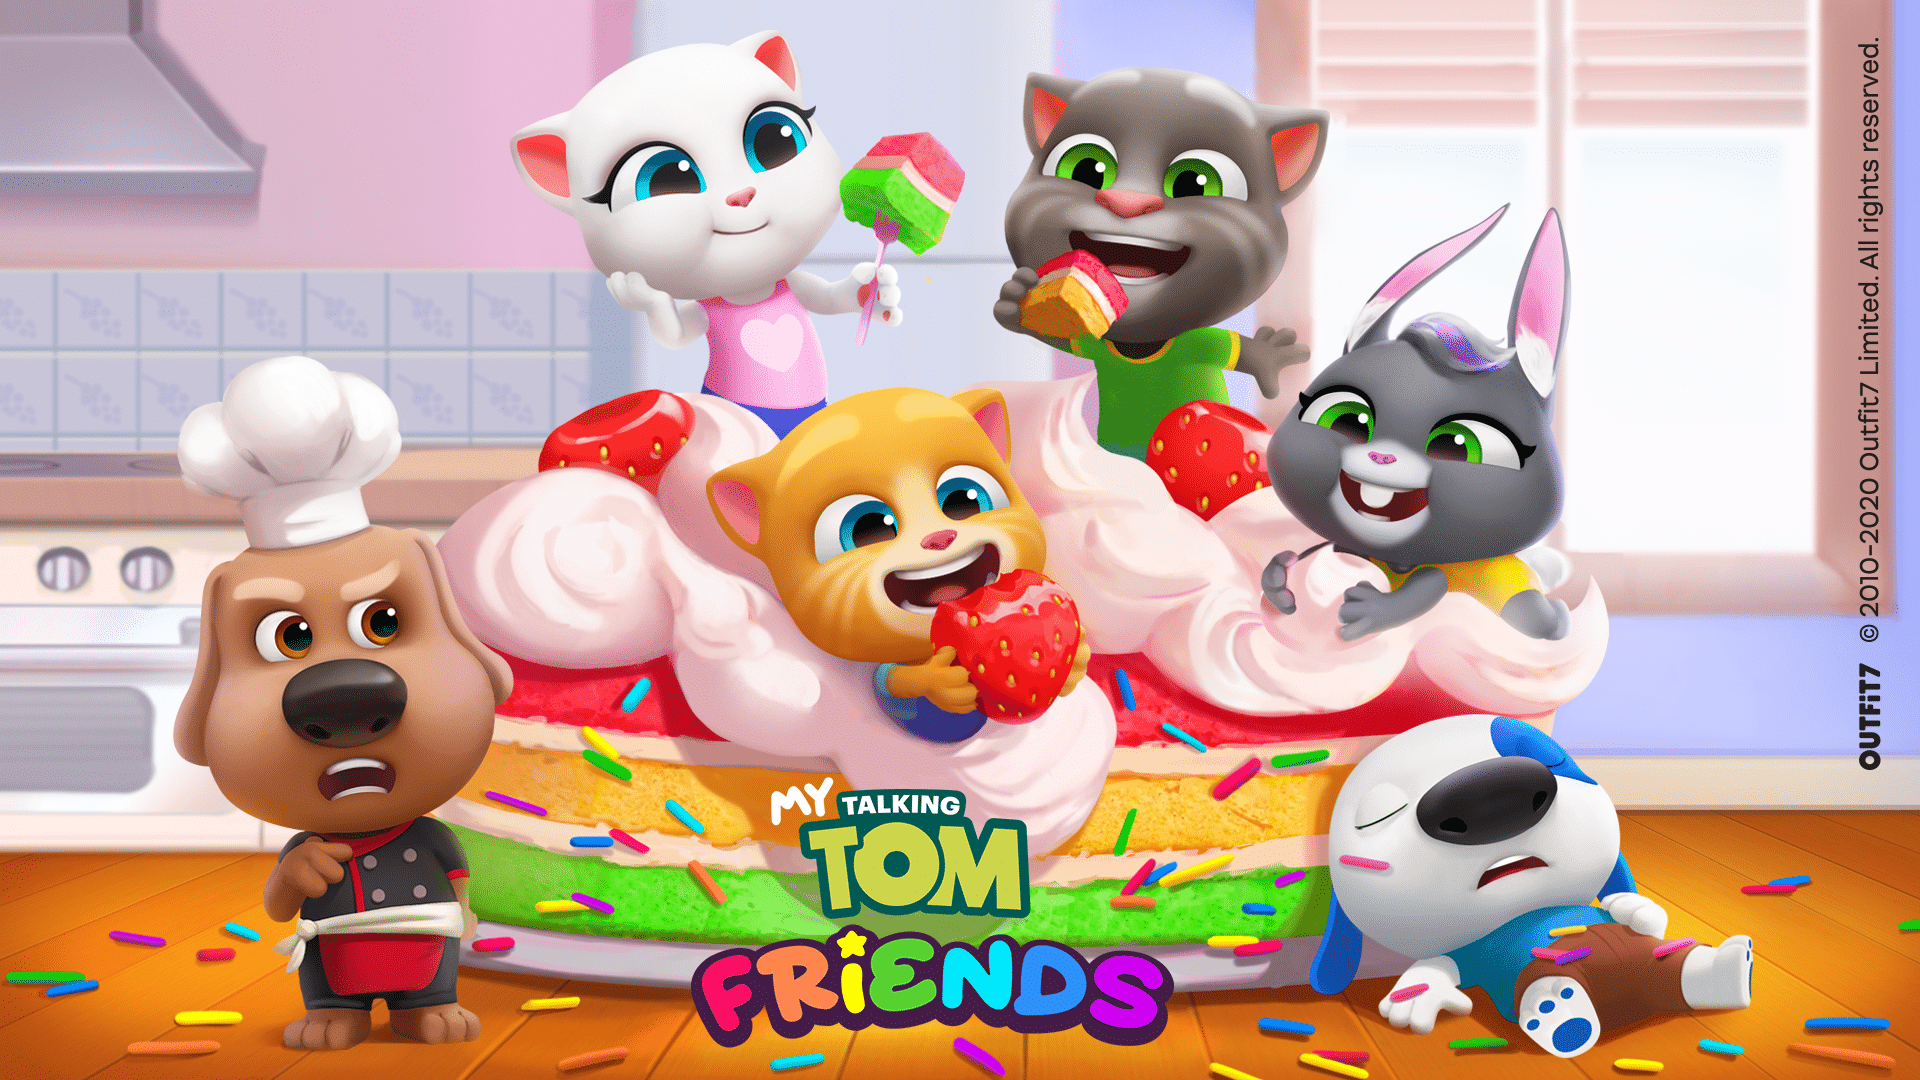 My Talking Tom Friends offers a new interactive adventure for the whole family